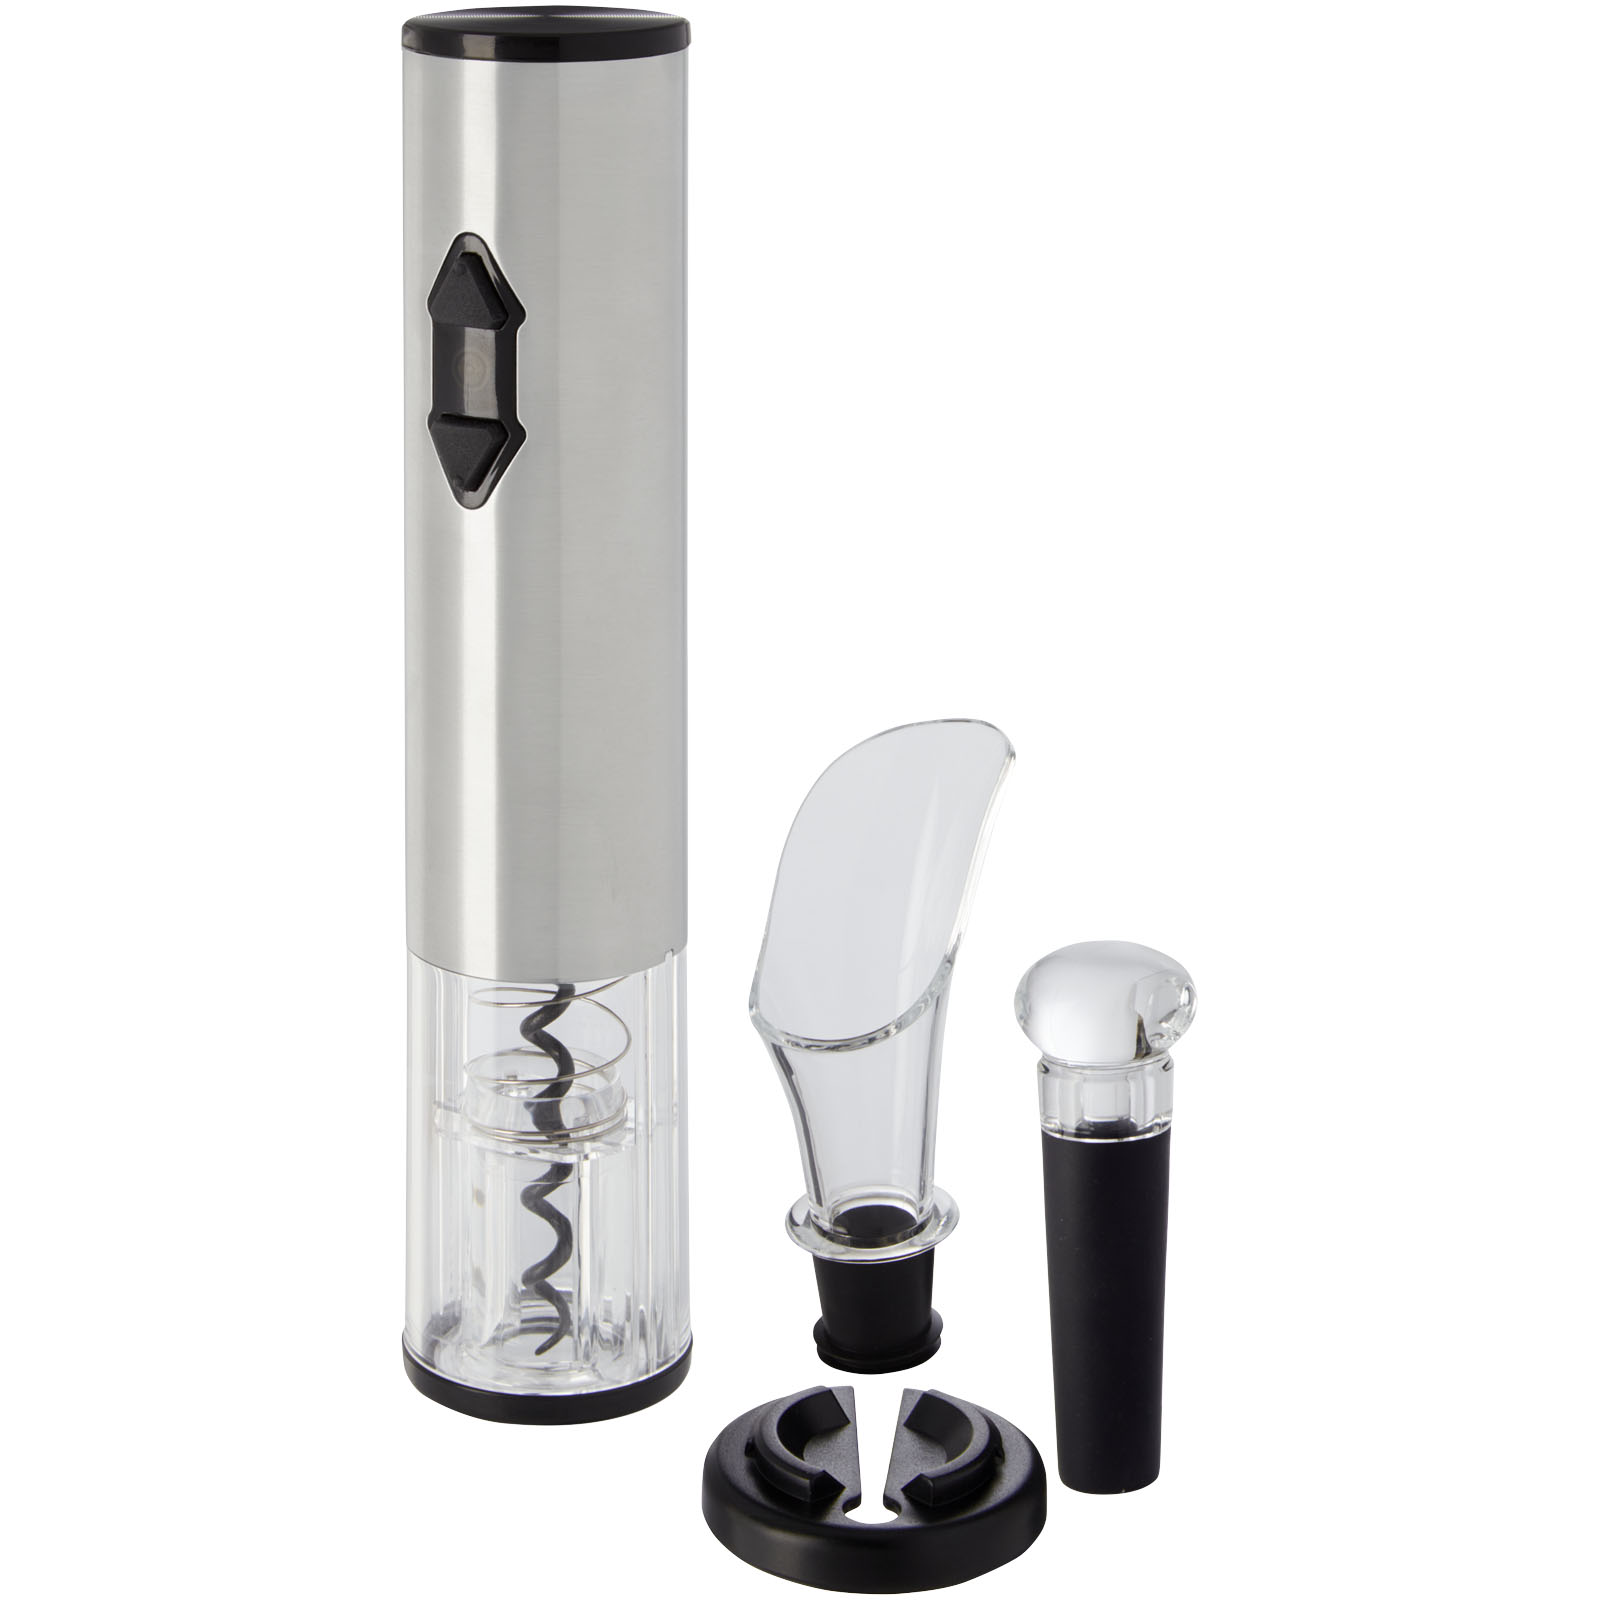 Advertising Wine Accessories - Pino electric wine opener with wine tools - 0